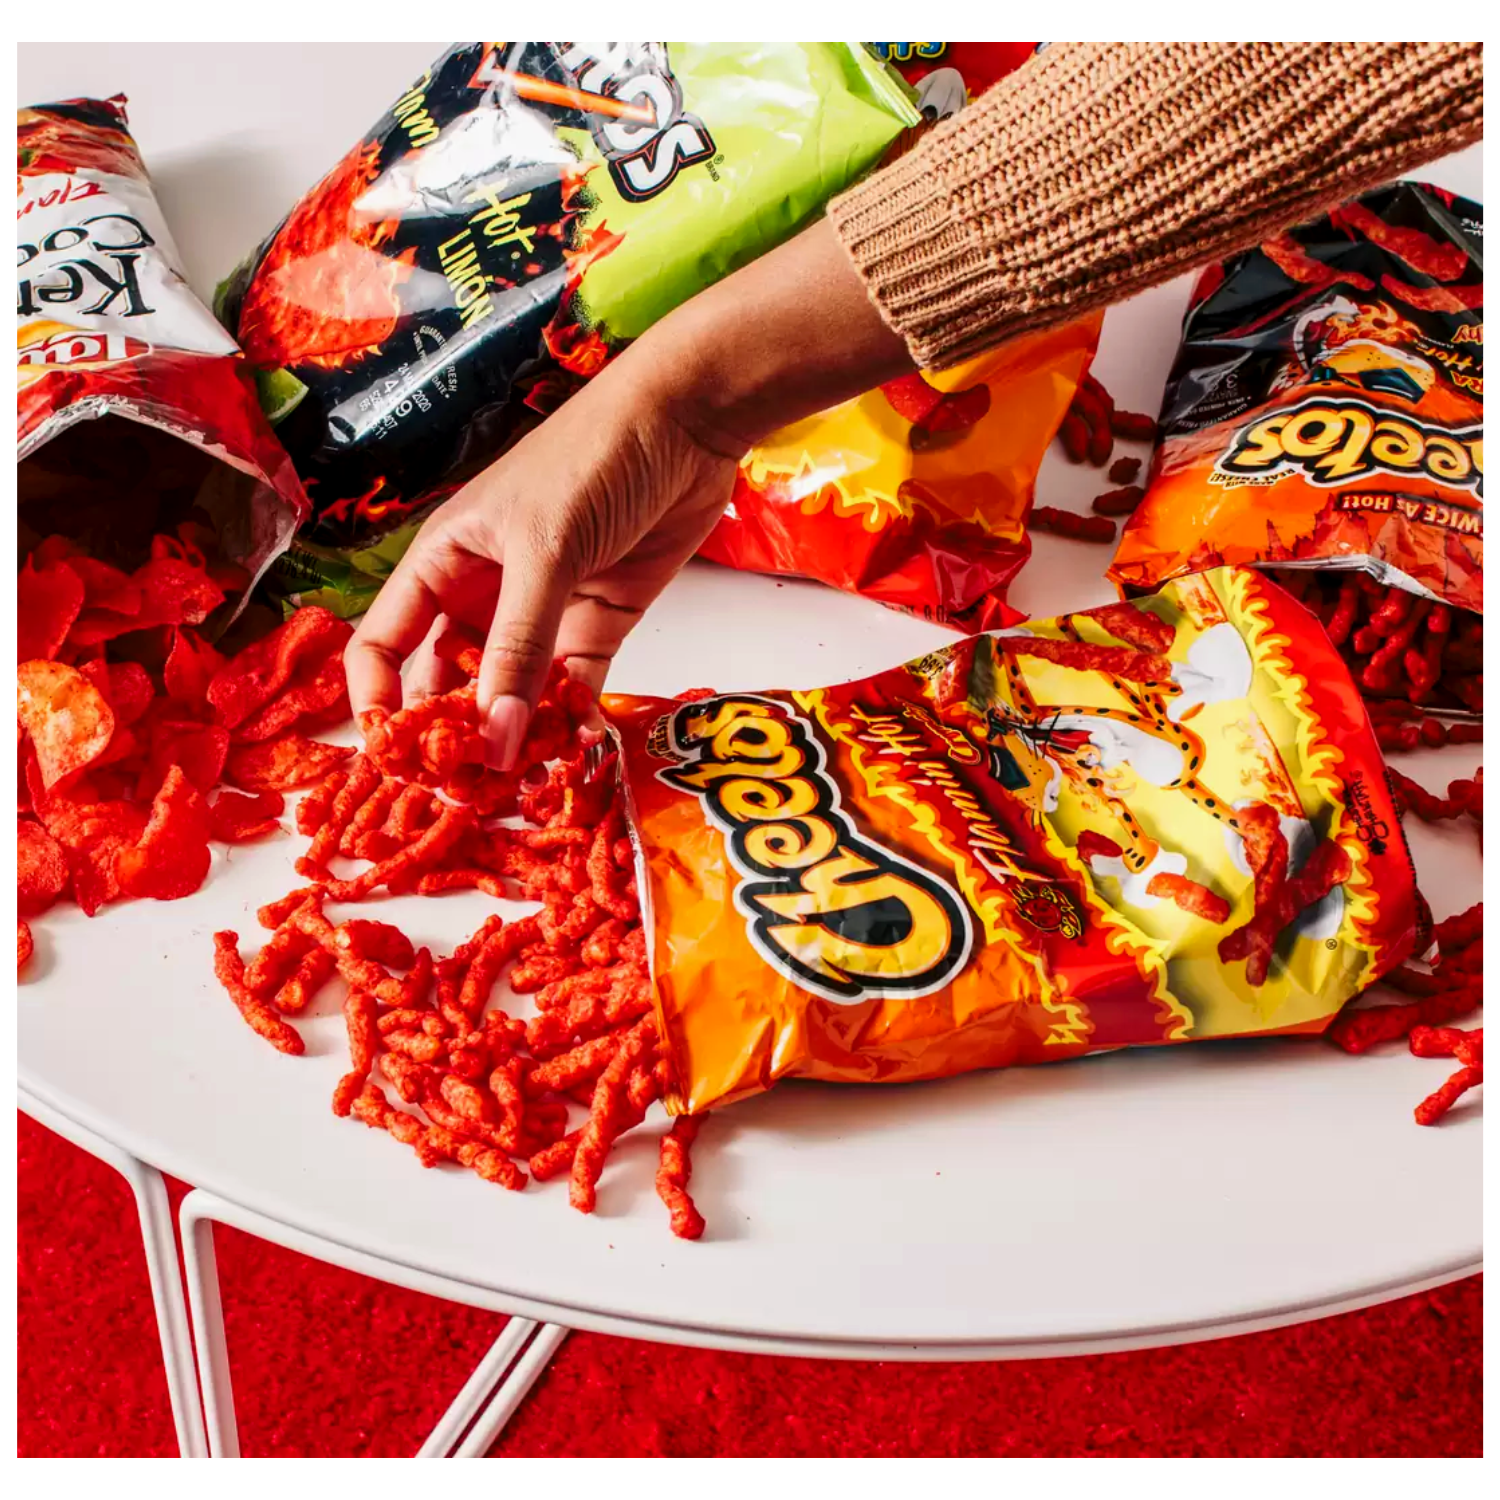 Frito Lay Party Size Bags — Magical Vacation Services, LLC